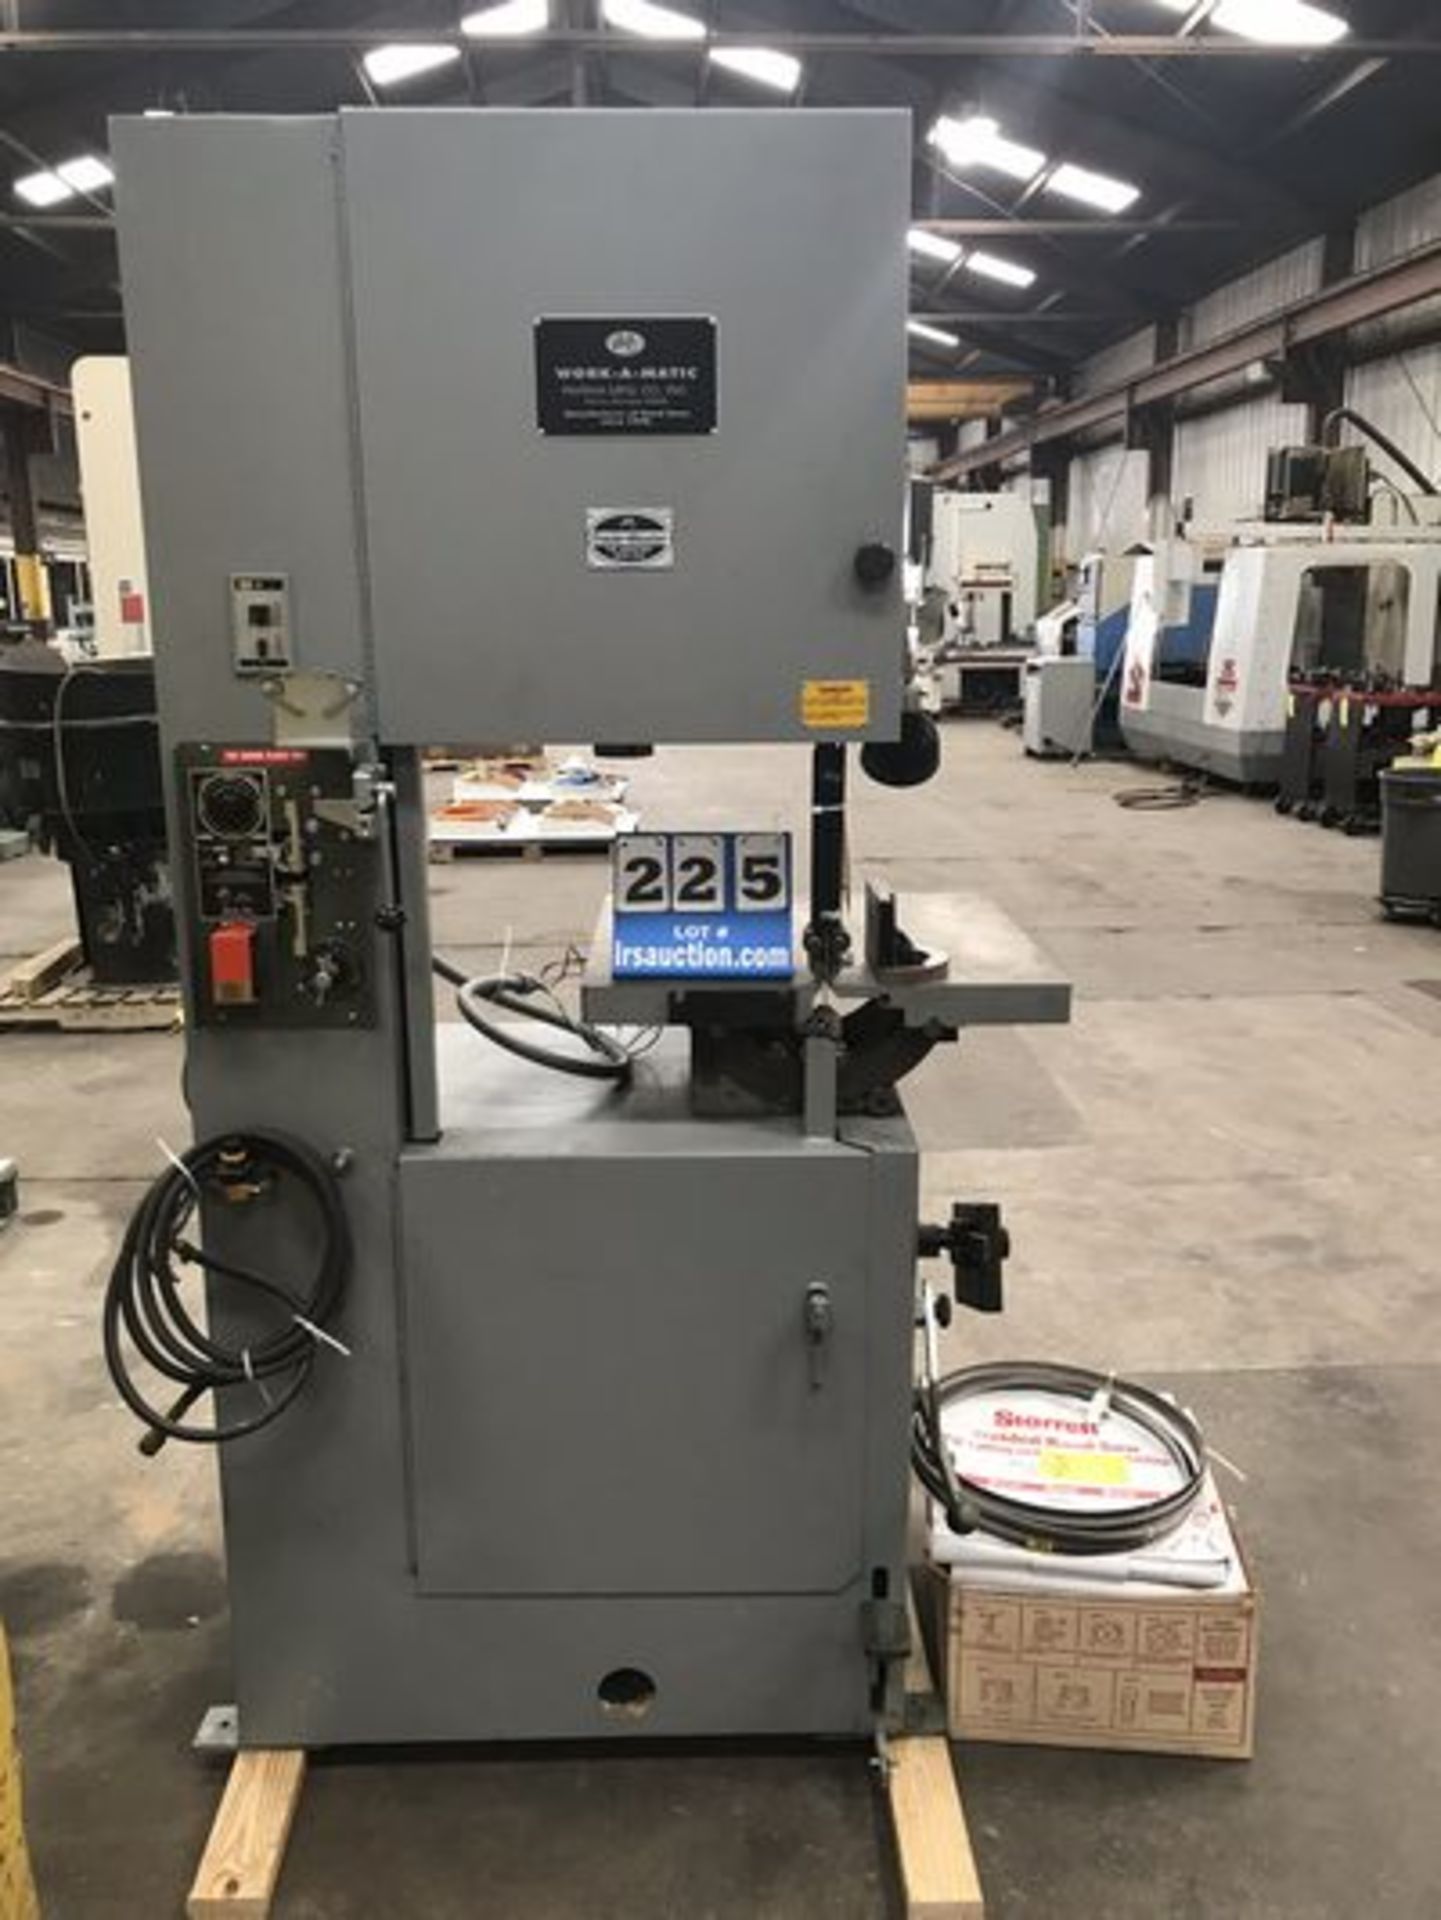 WORK-A-MATIC VERTICAL BAND SAW, BLADE SIZE: 12’6”, APPROX 24” x 24” TABLE, W/ GROB WELDER &